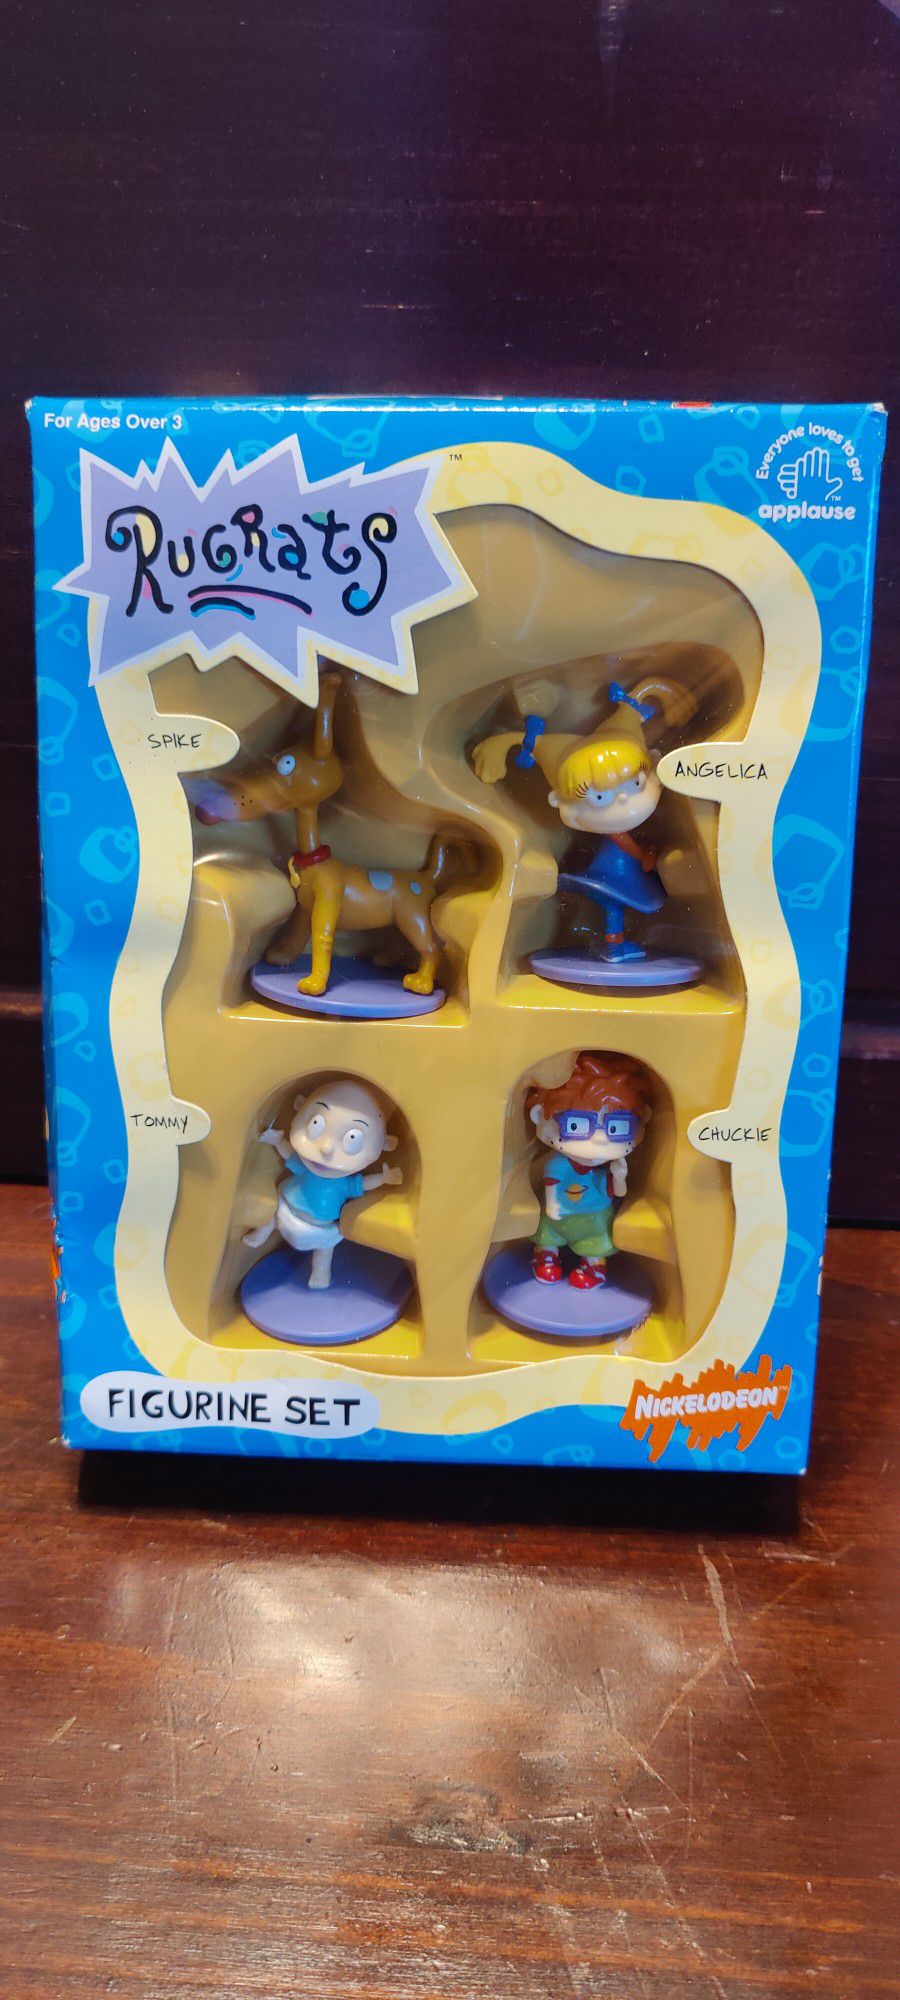 Rugrats Toys '97